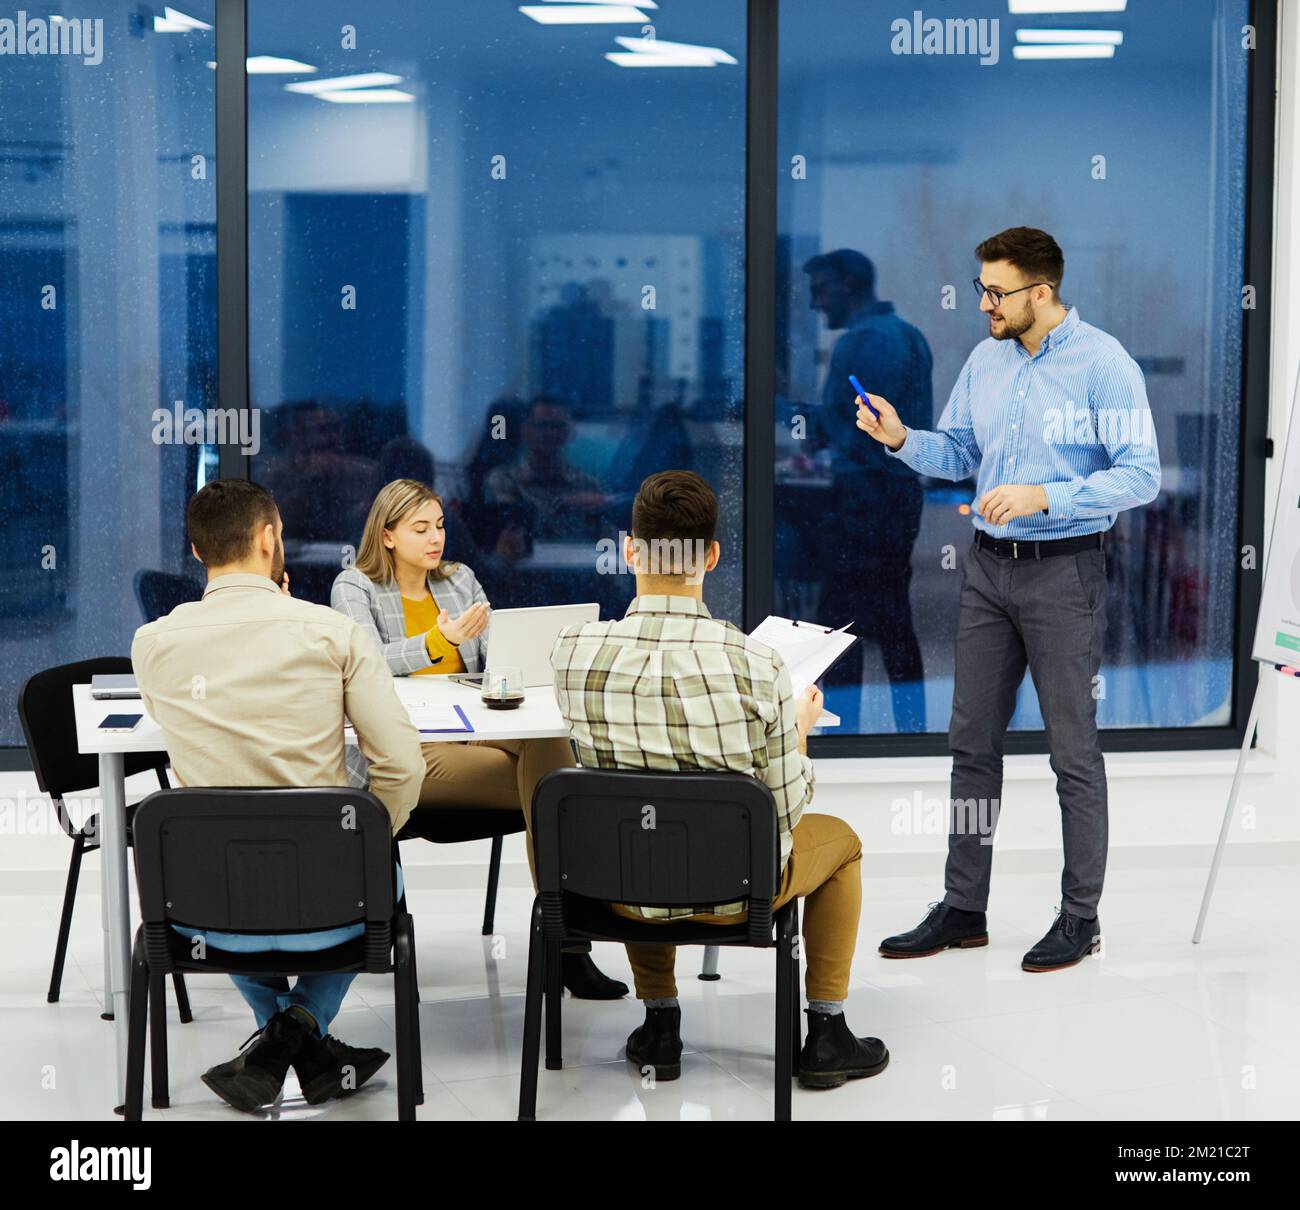 young business people meeting office teamwork group whiteboard presentation seminar man businessman startup project idea Stock Photo